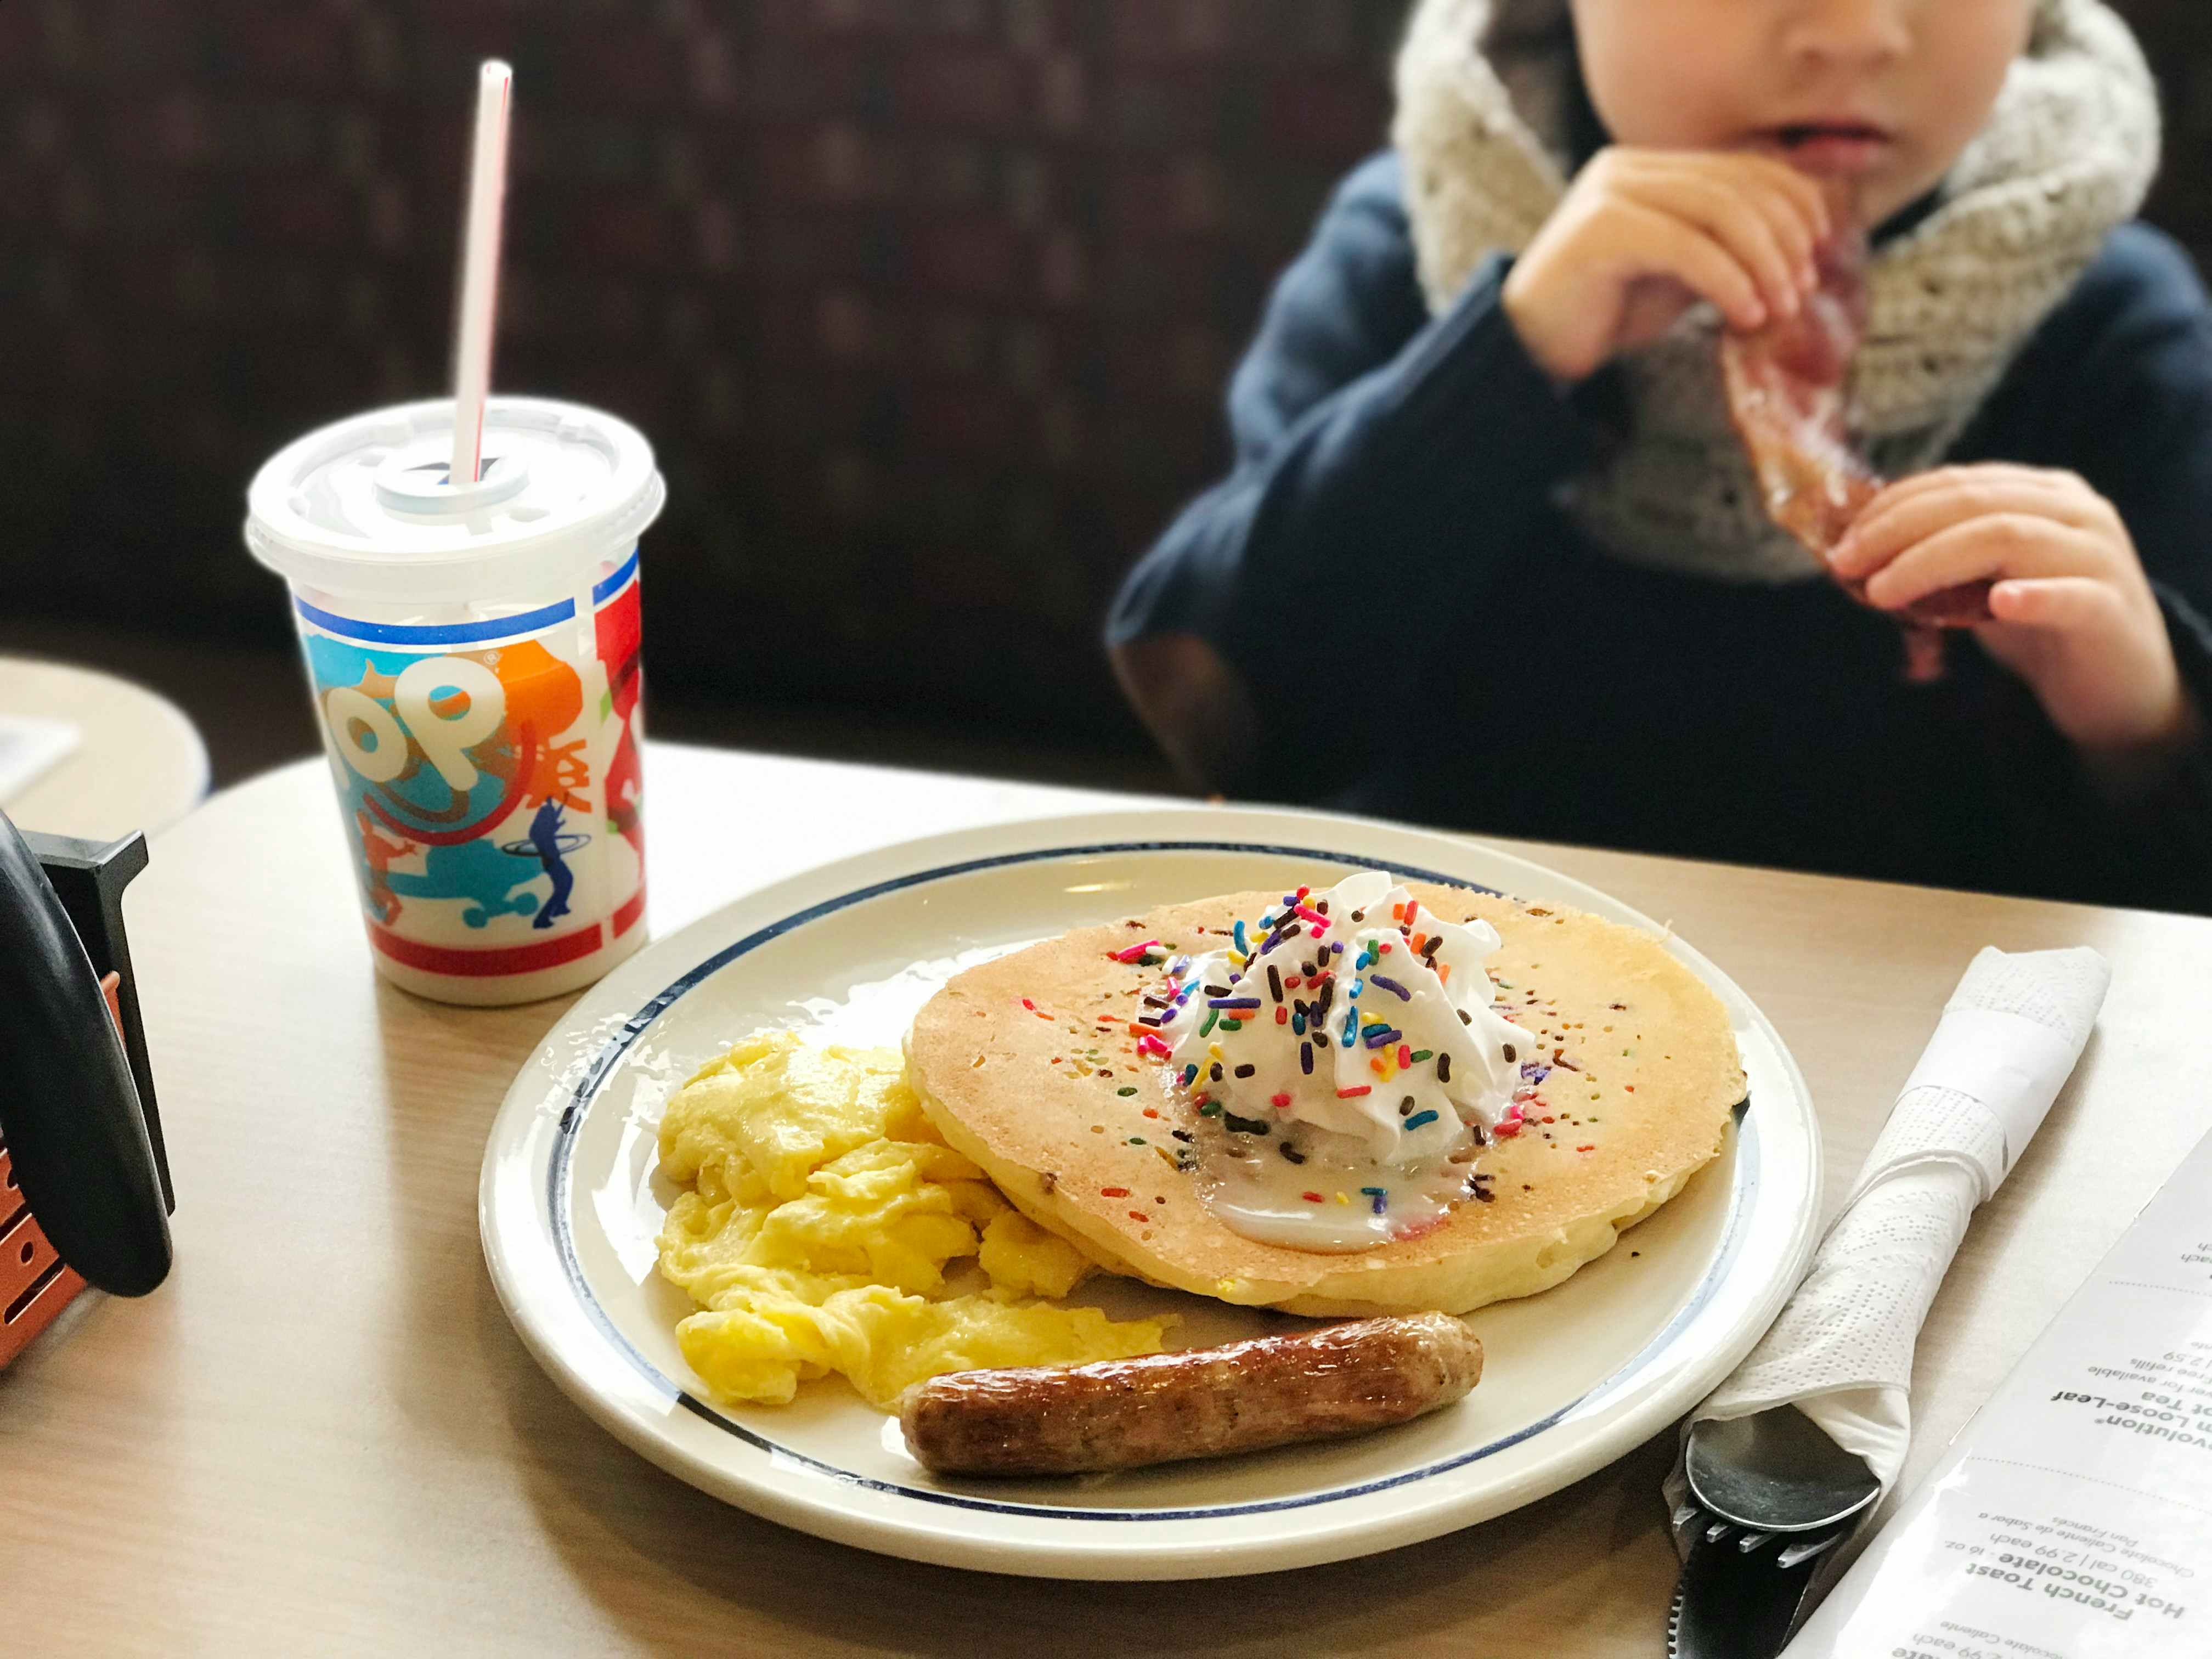 A child eating a pancake, sausage, and scrambled eggs kids meal.